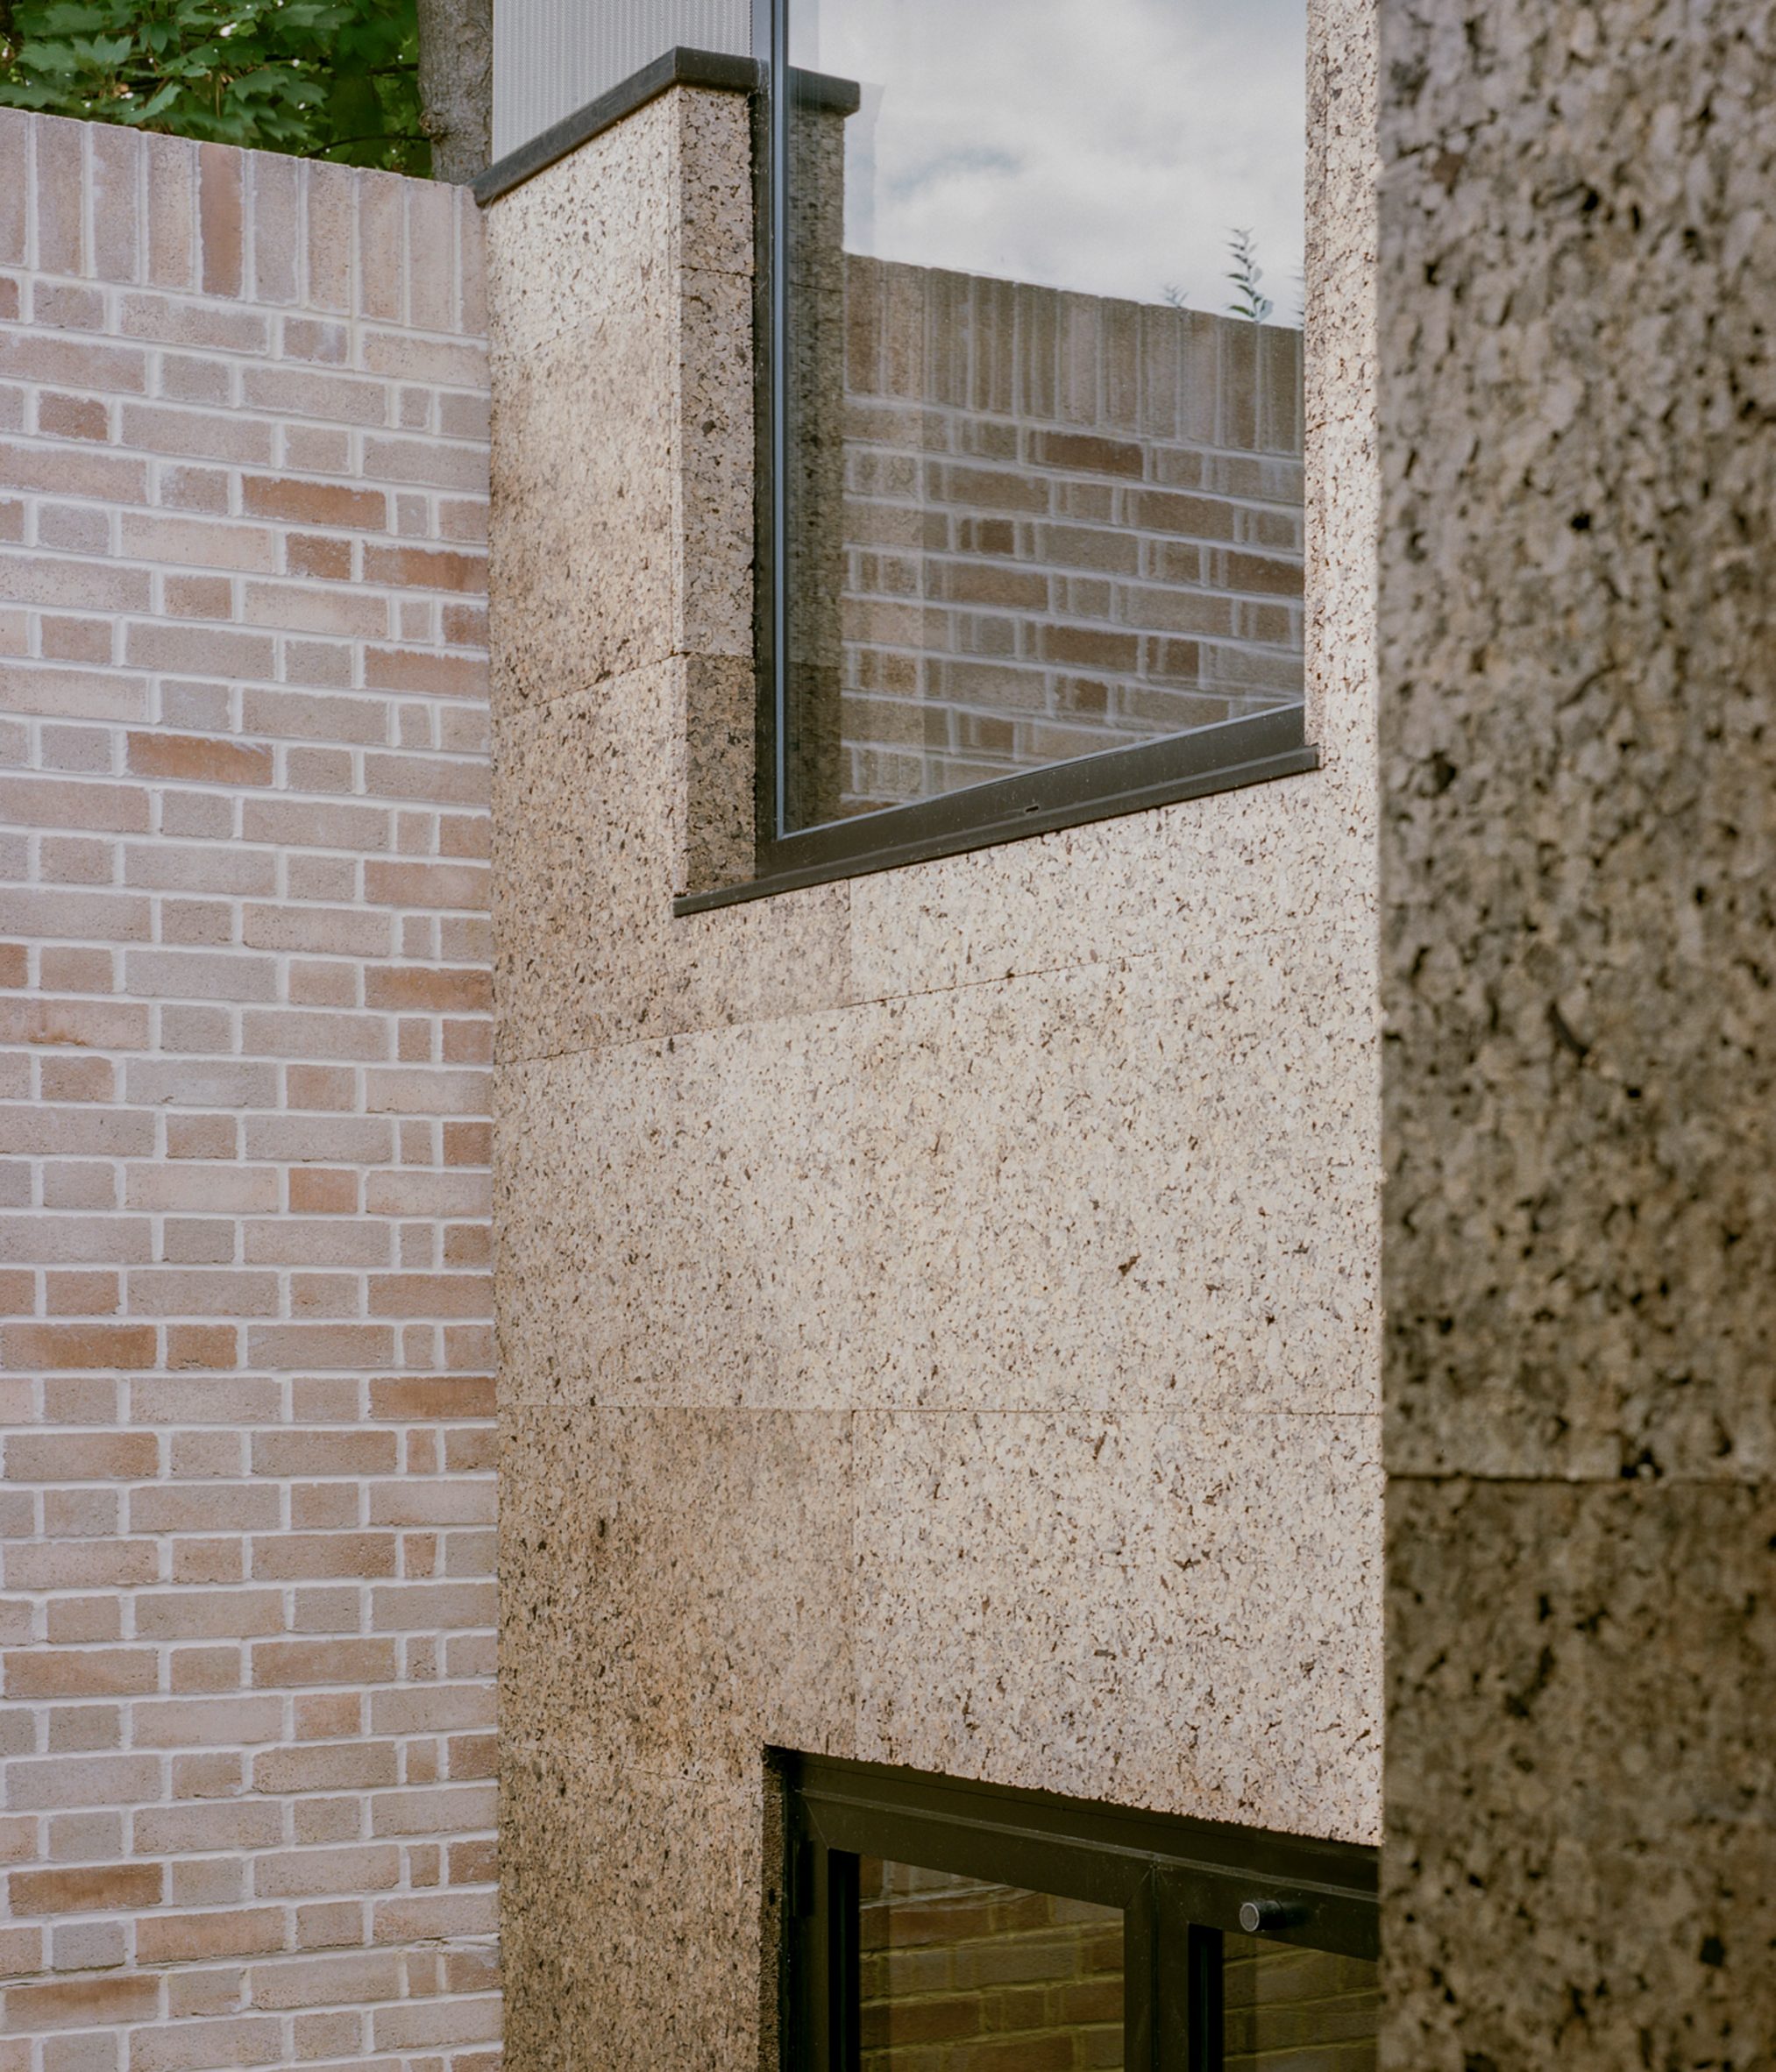 Exterior image of the cork cladding across the exterior of Cork House